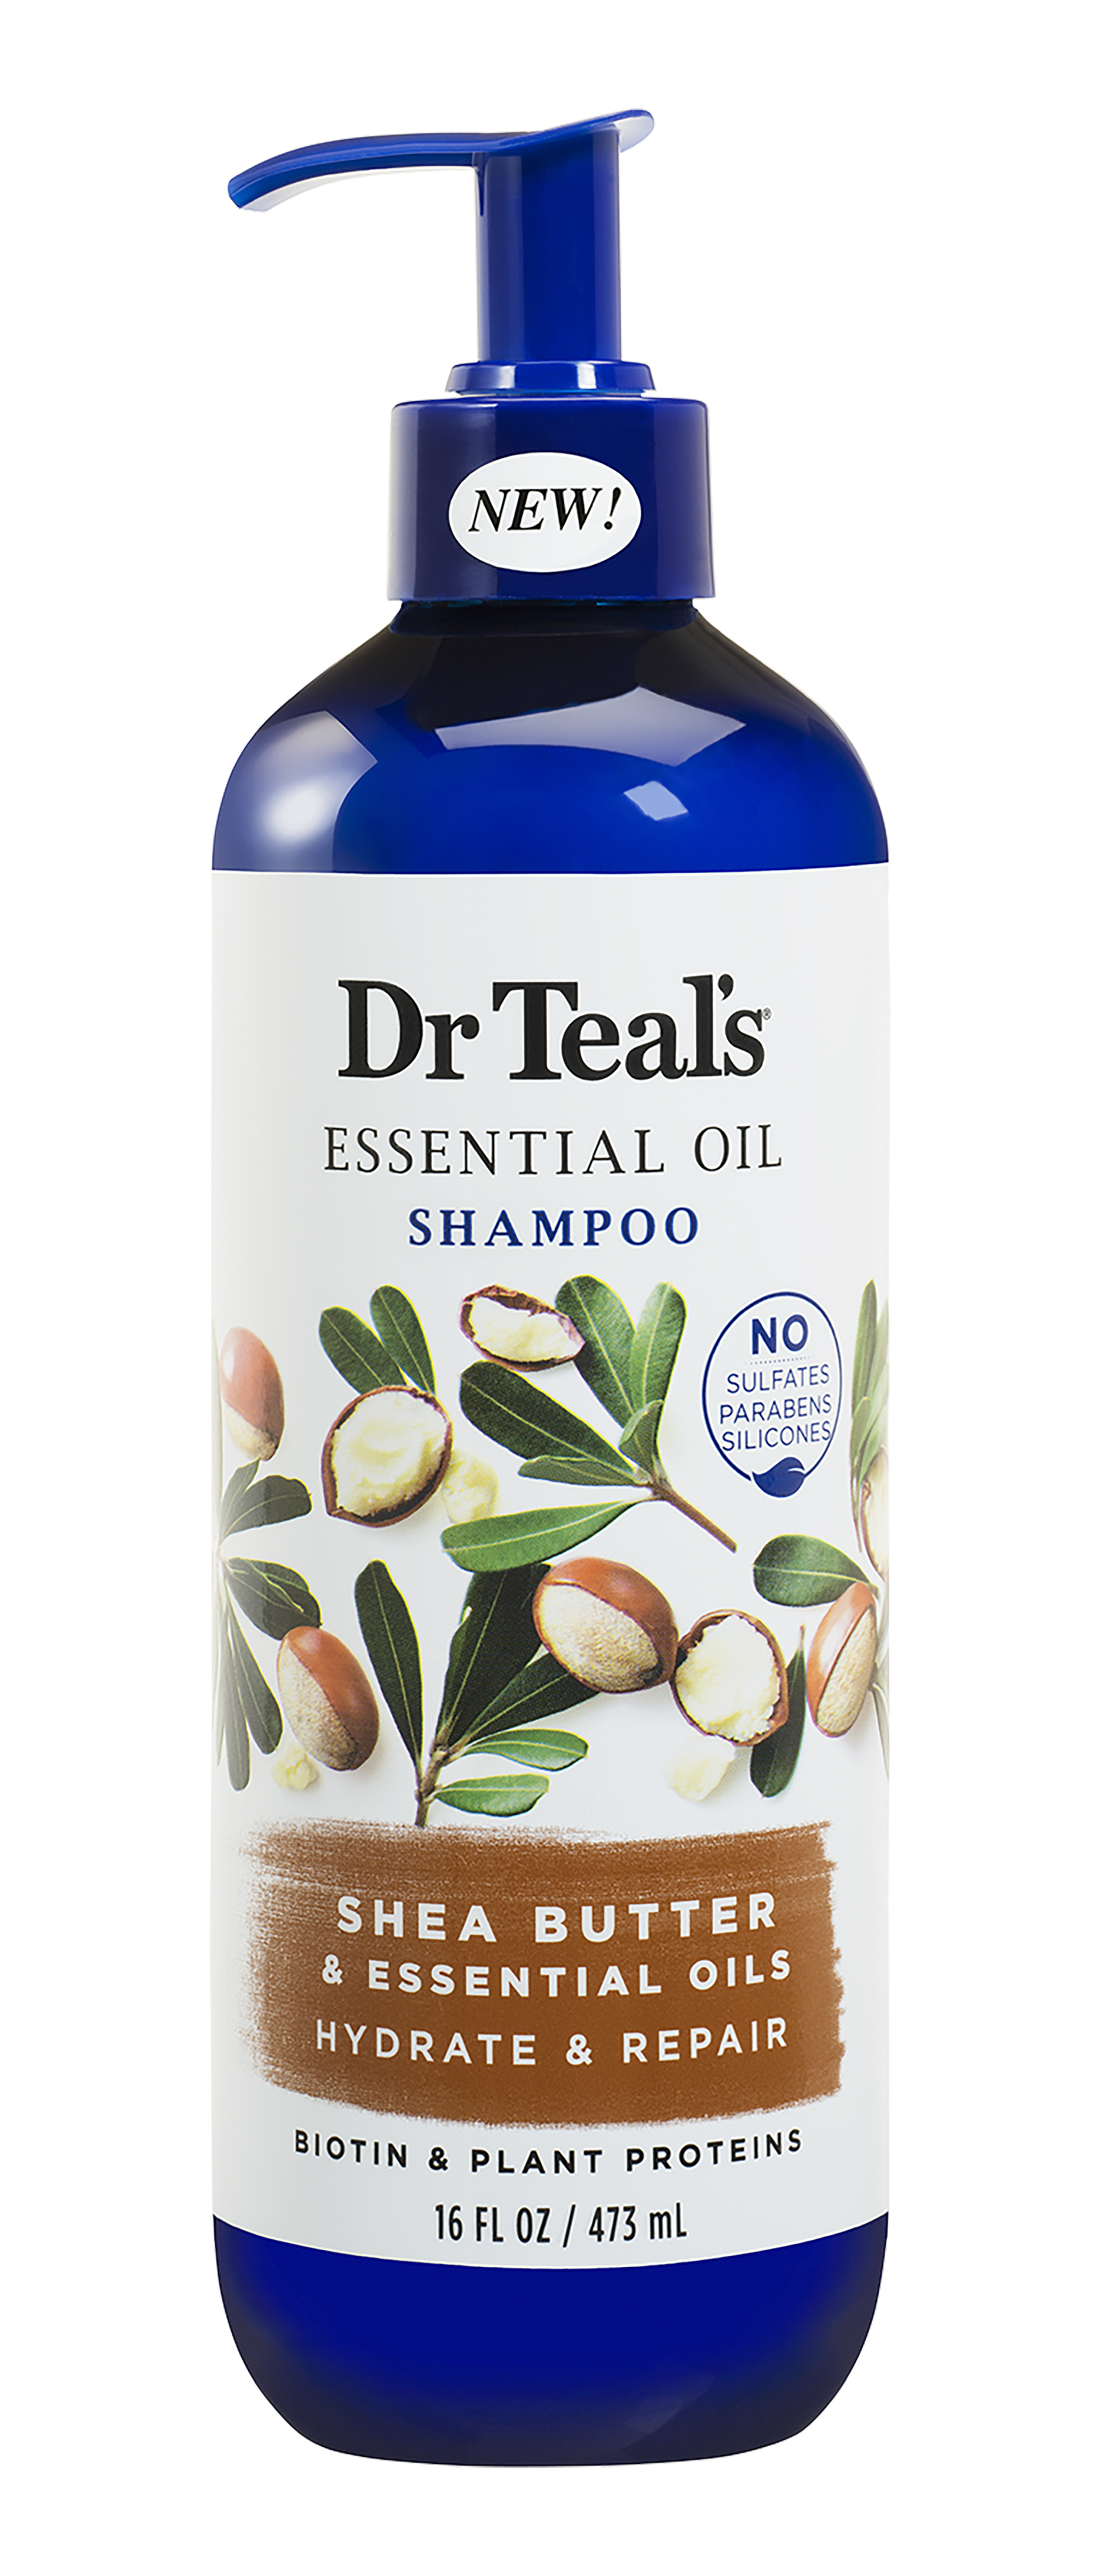 Dr Teal's Shea Butter Hydrate & Repair Essential Oil Shampoo, Sulfate Free, 16 oz. - image 1 of 7